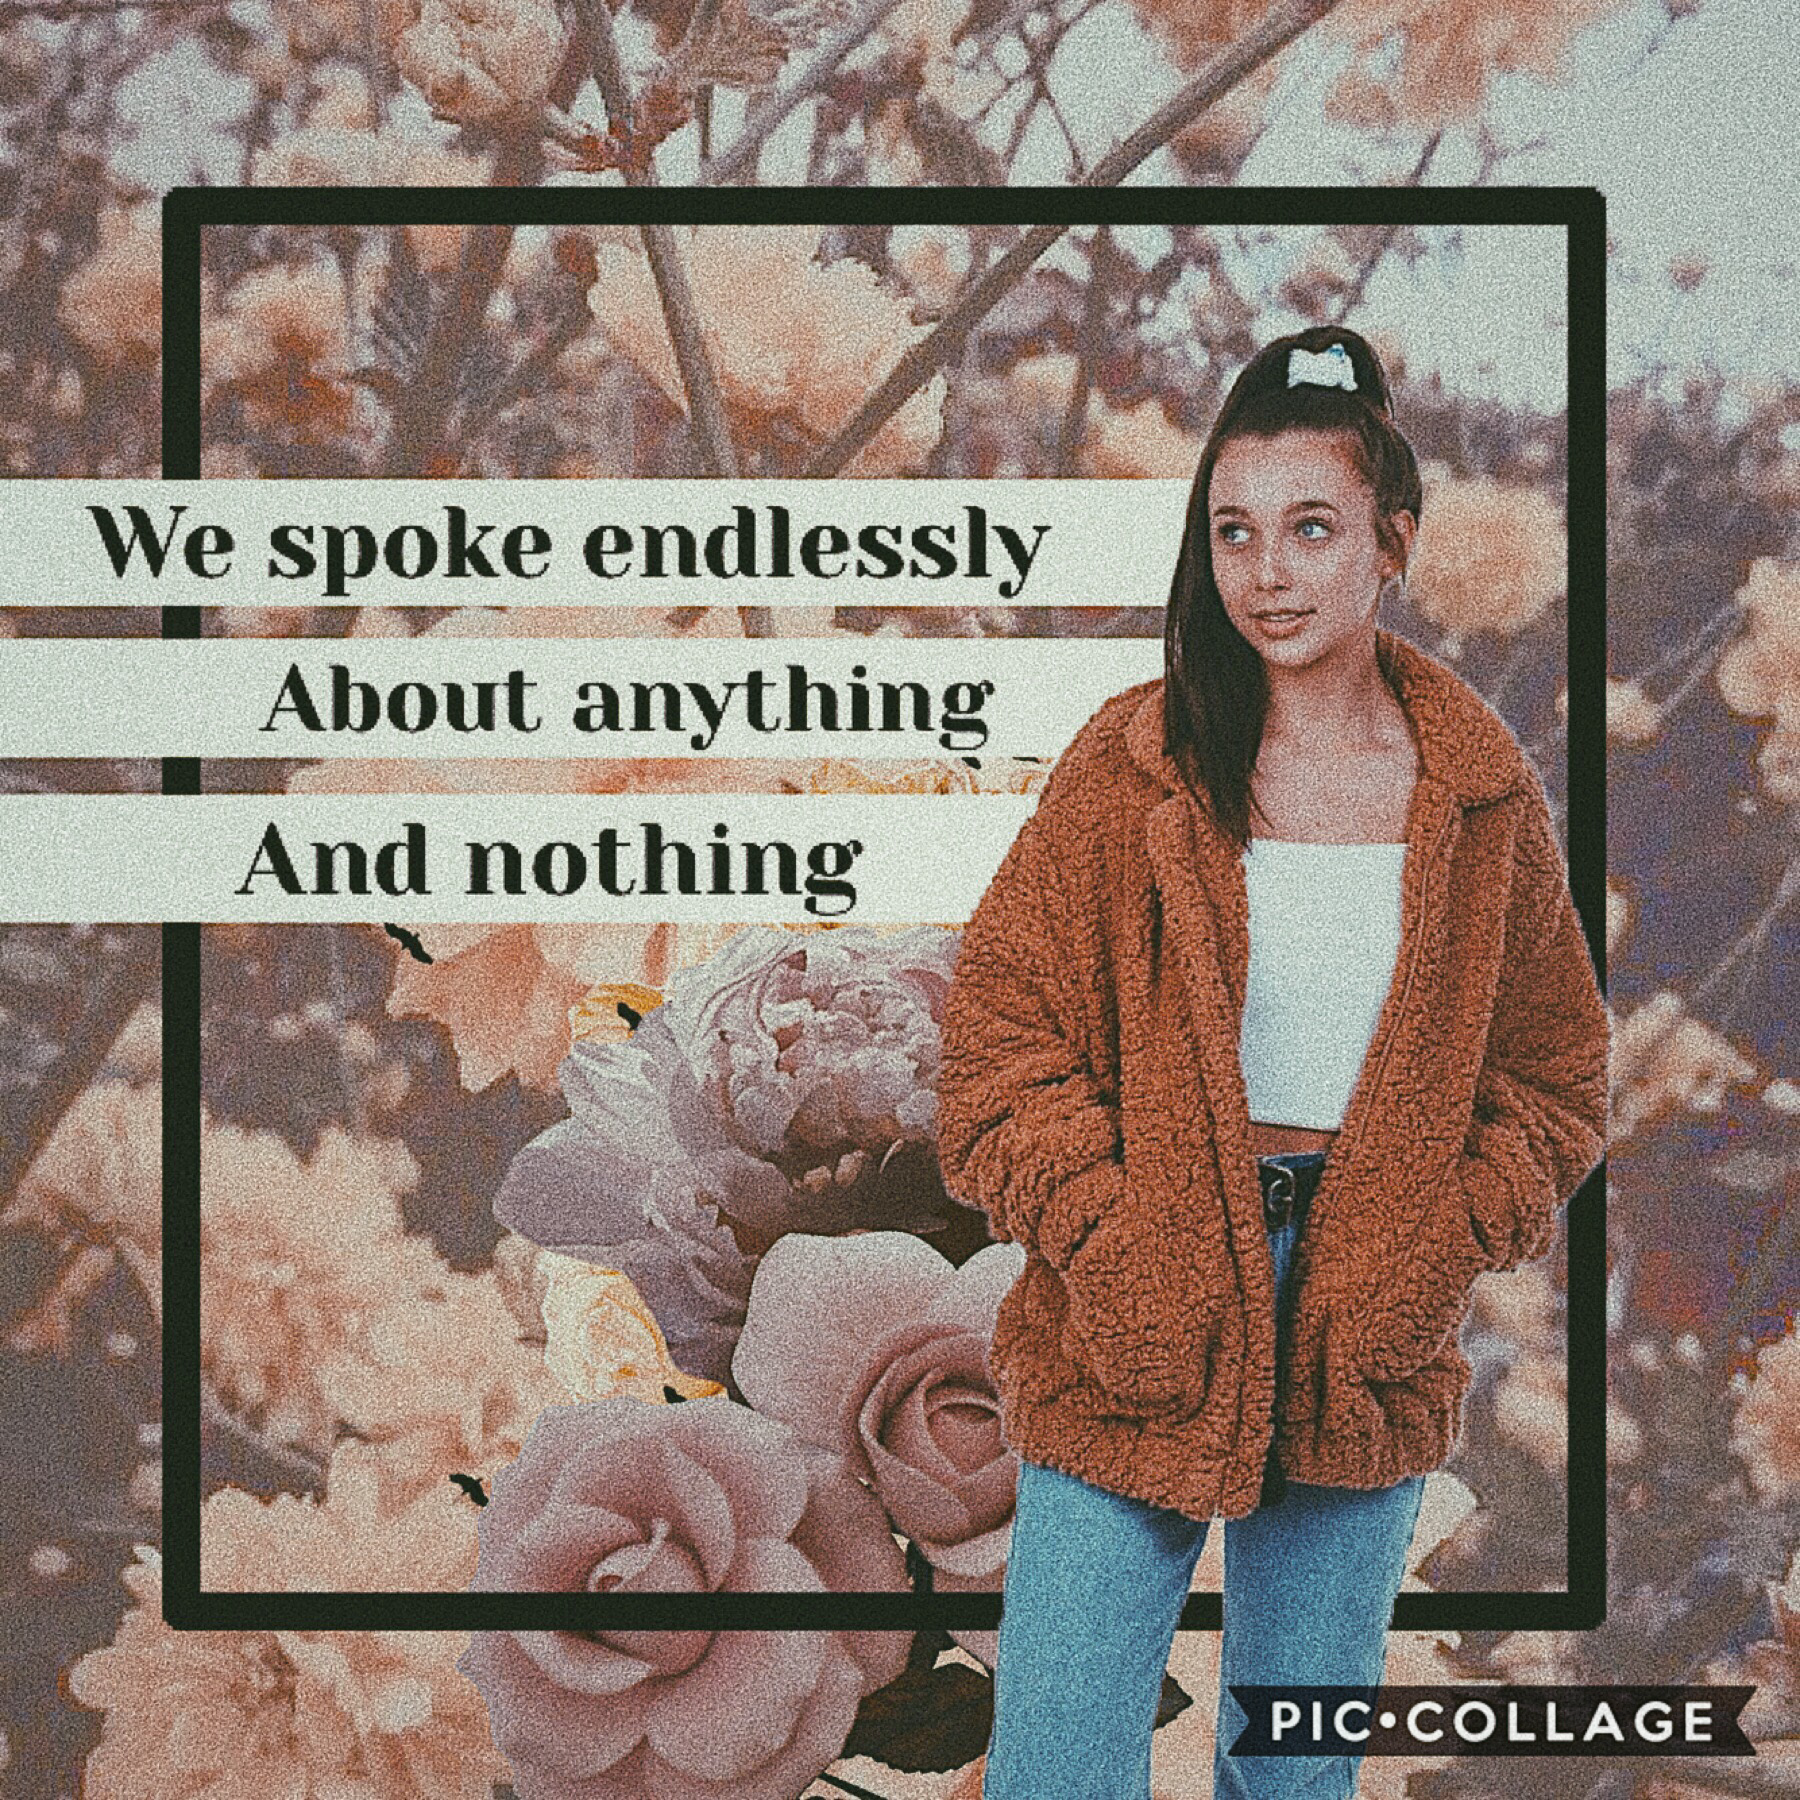 Emma edit. It’s not that good but whatever. Please like and comment ideas for some future post. Also, im down to collab so comment and I’ll get back to you. 

❤️❤️❤️